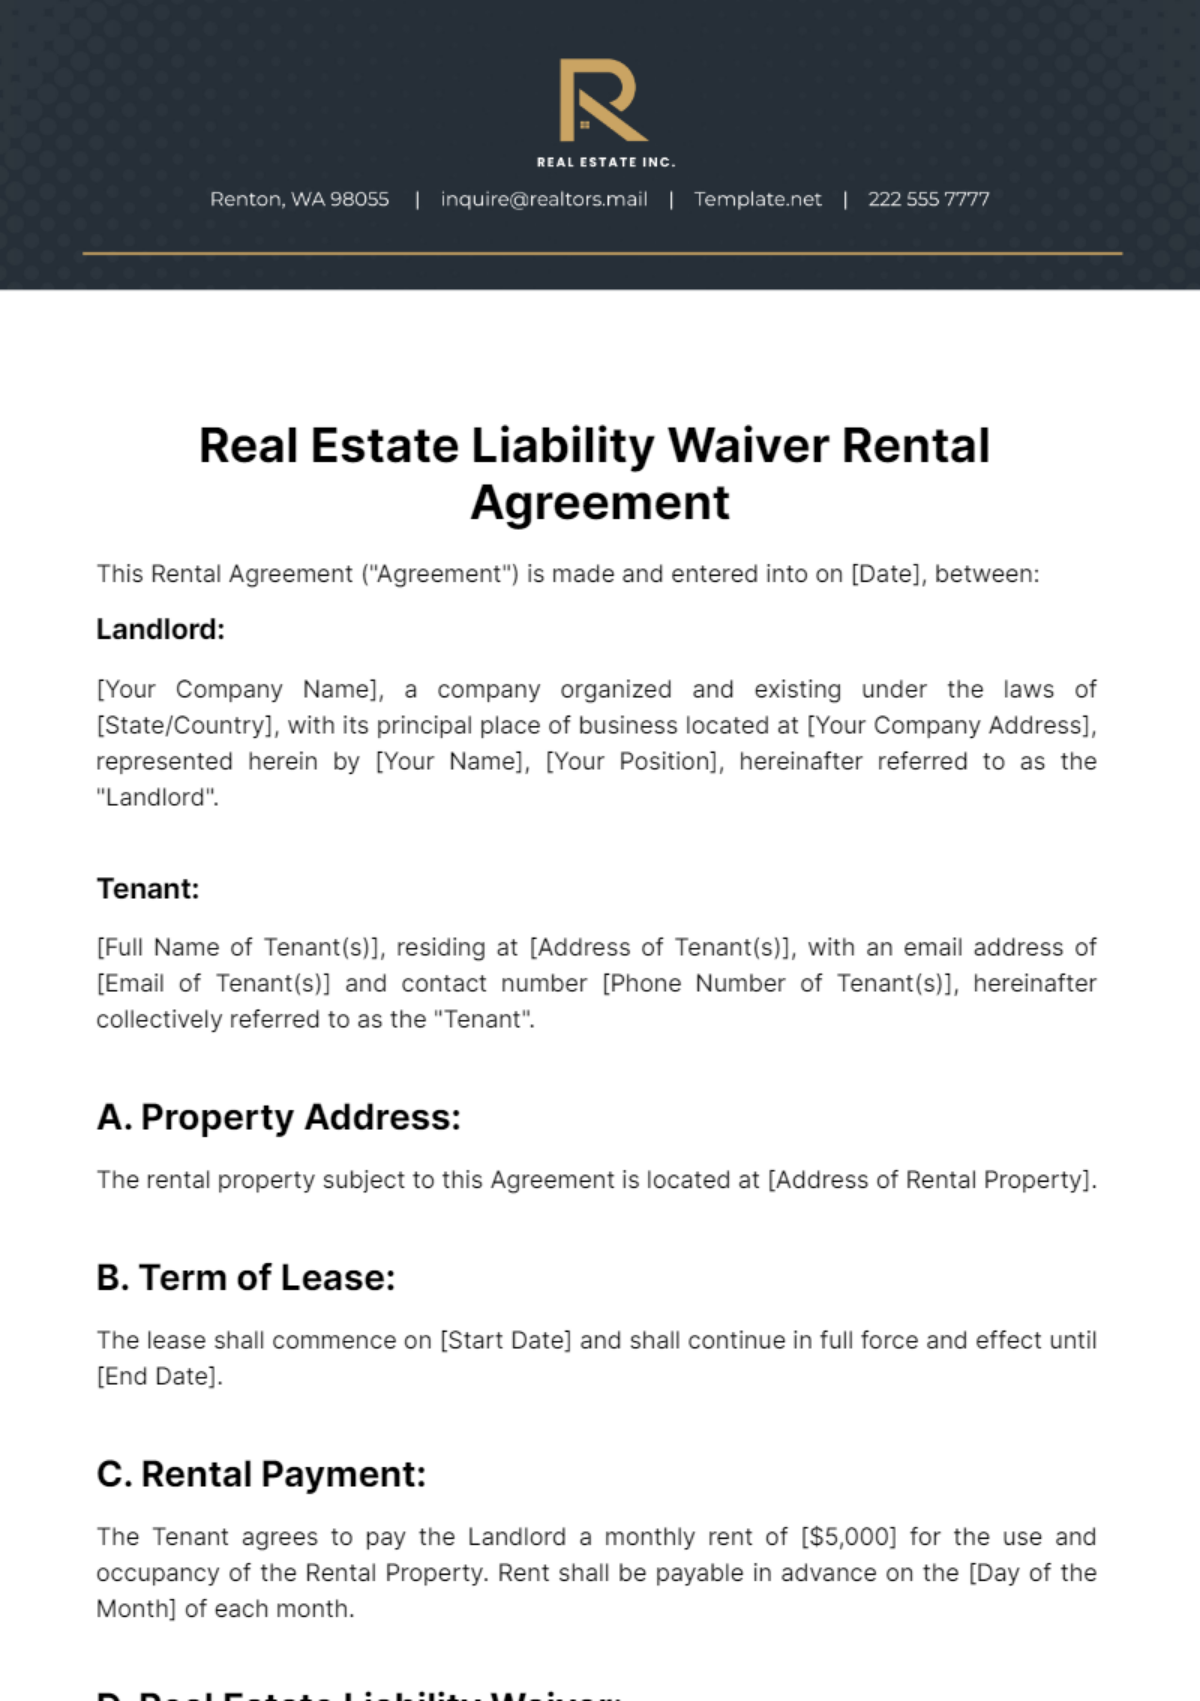 Free Real Estate Liability Waiver Rental Agreement Template